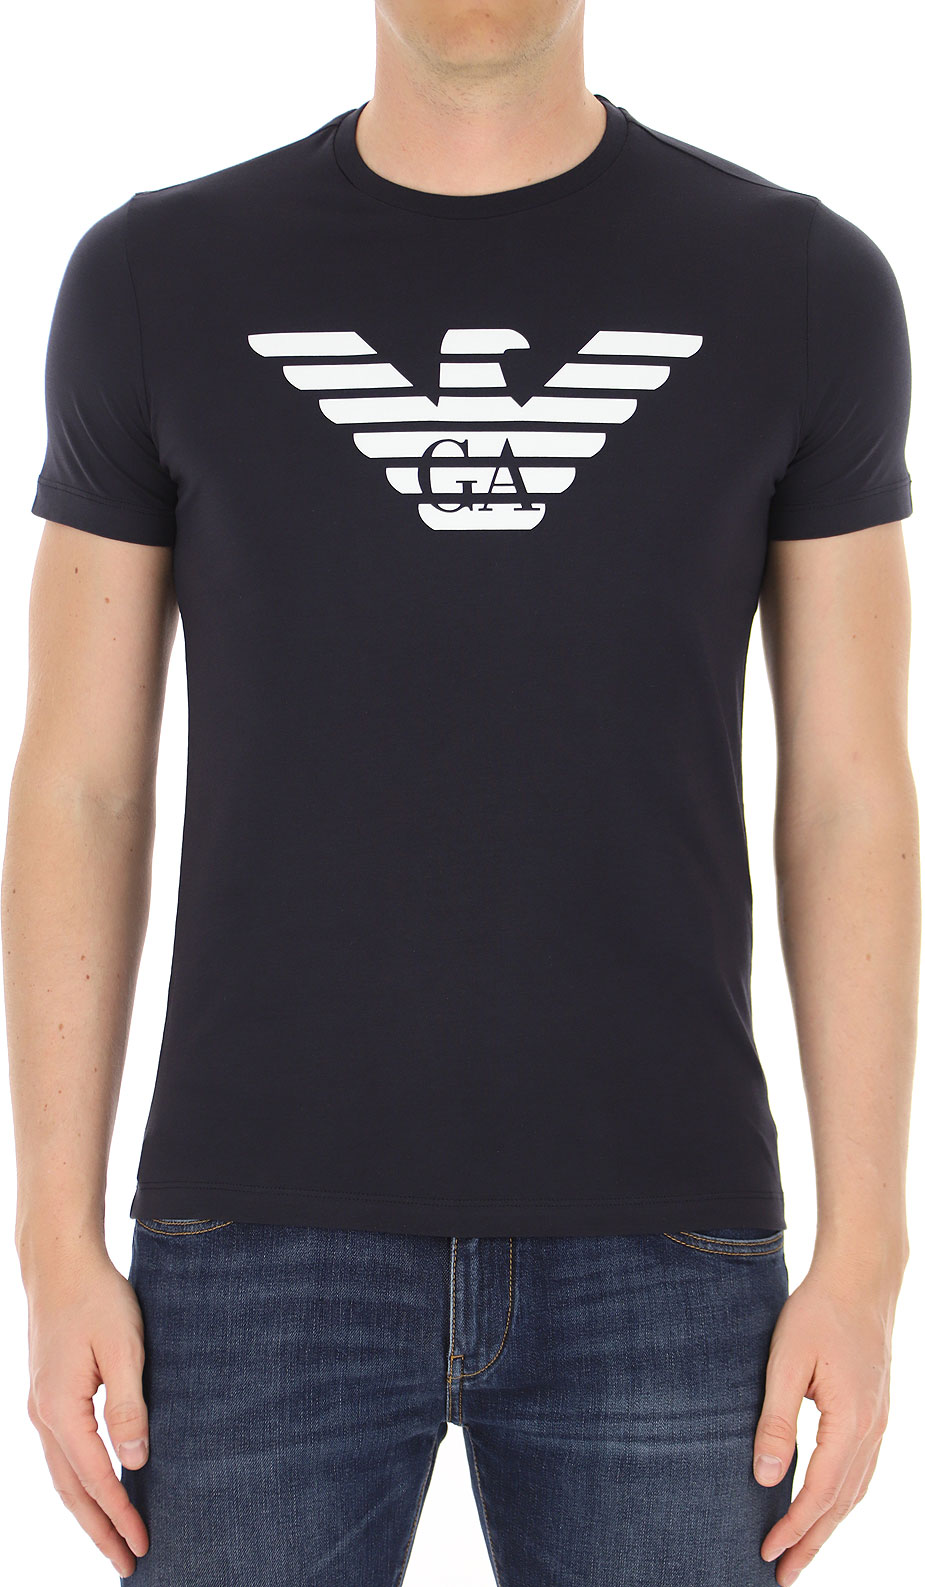 Mens Clothing Emporio Armani, Style code: 8n1t99-1jnqz-0939